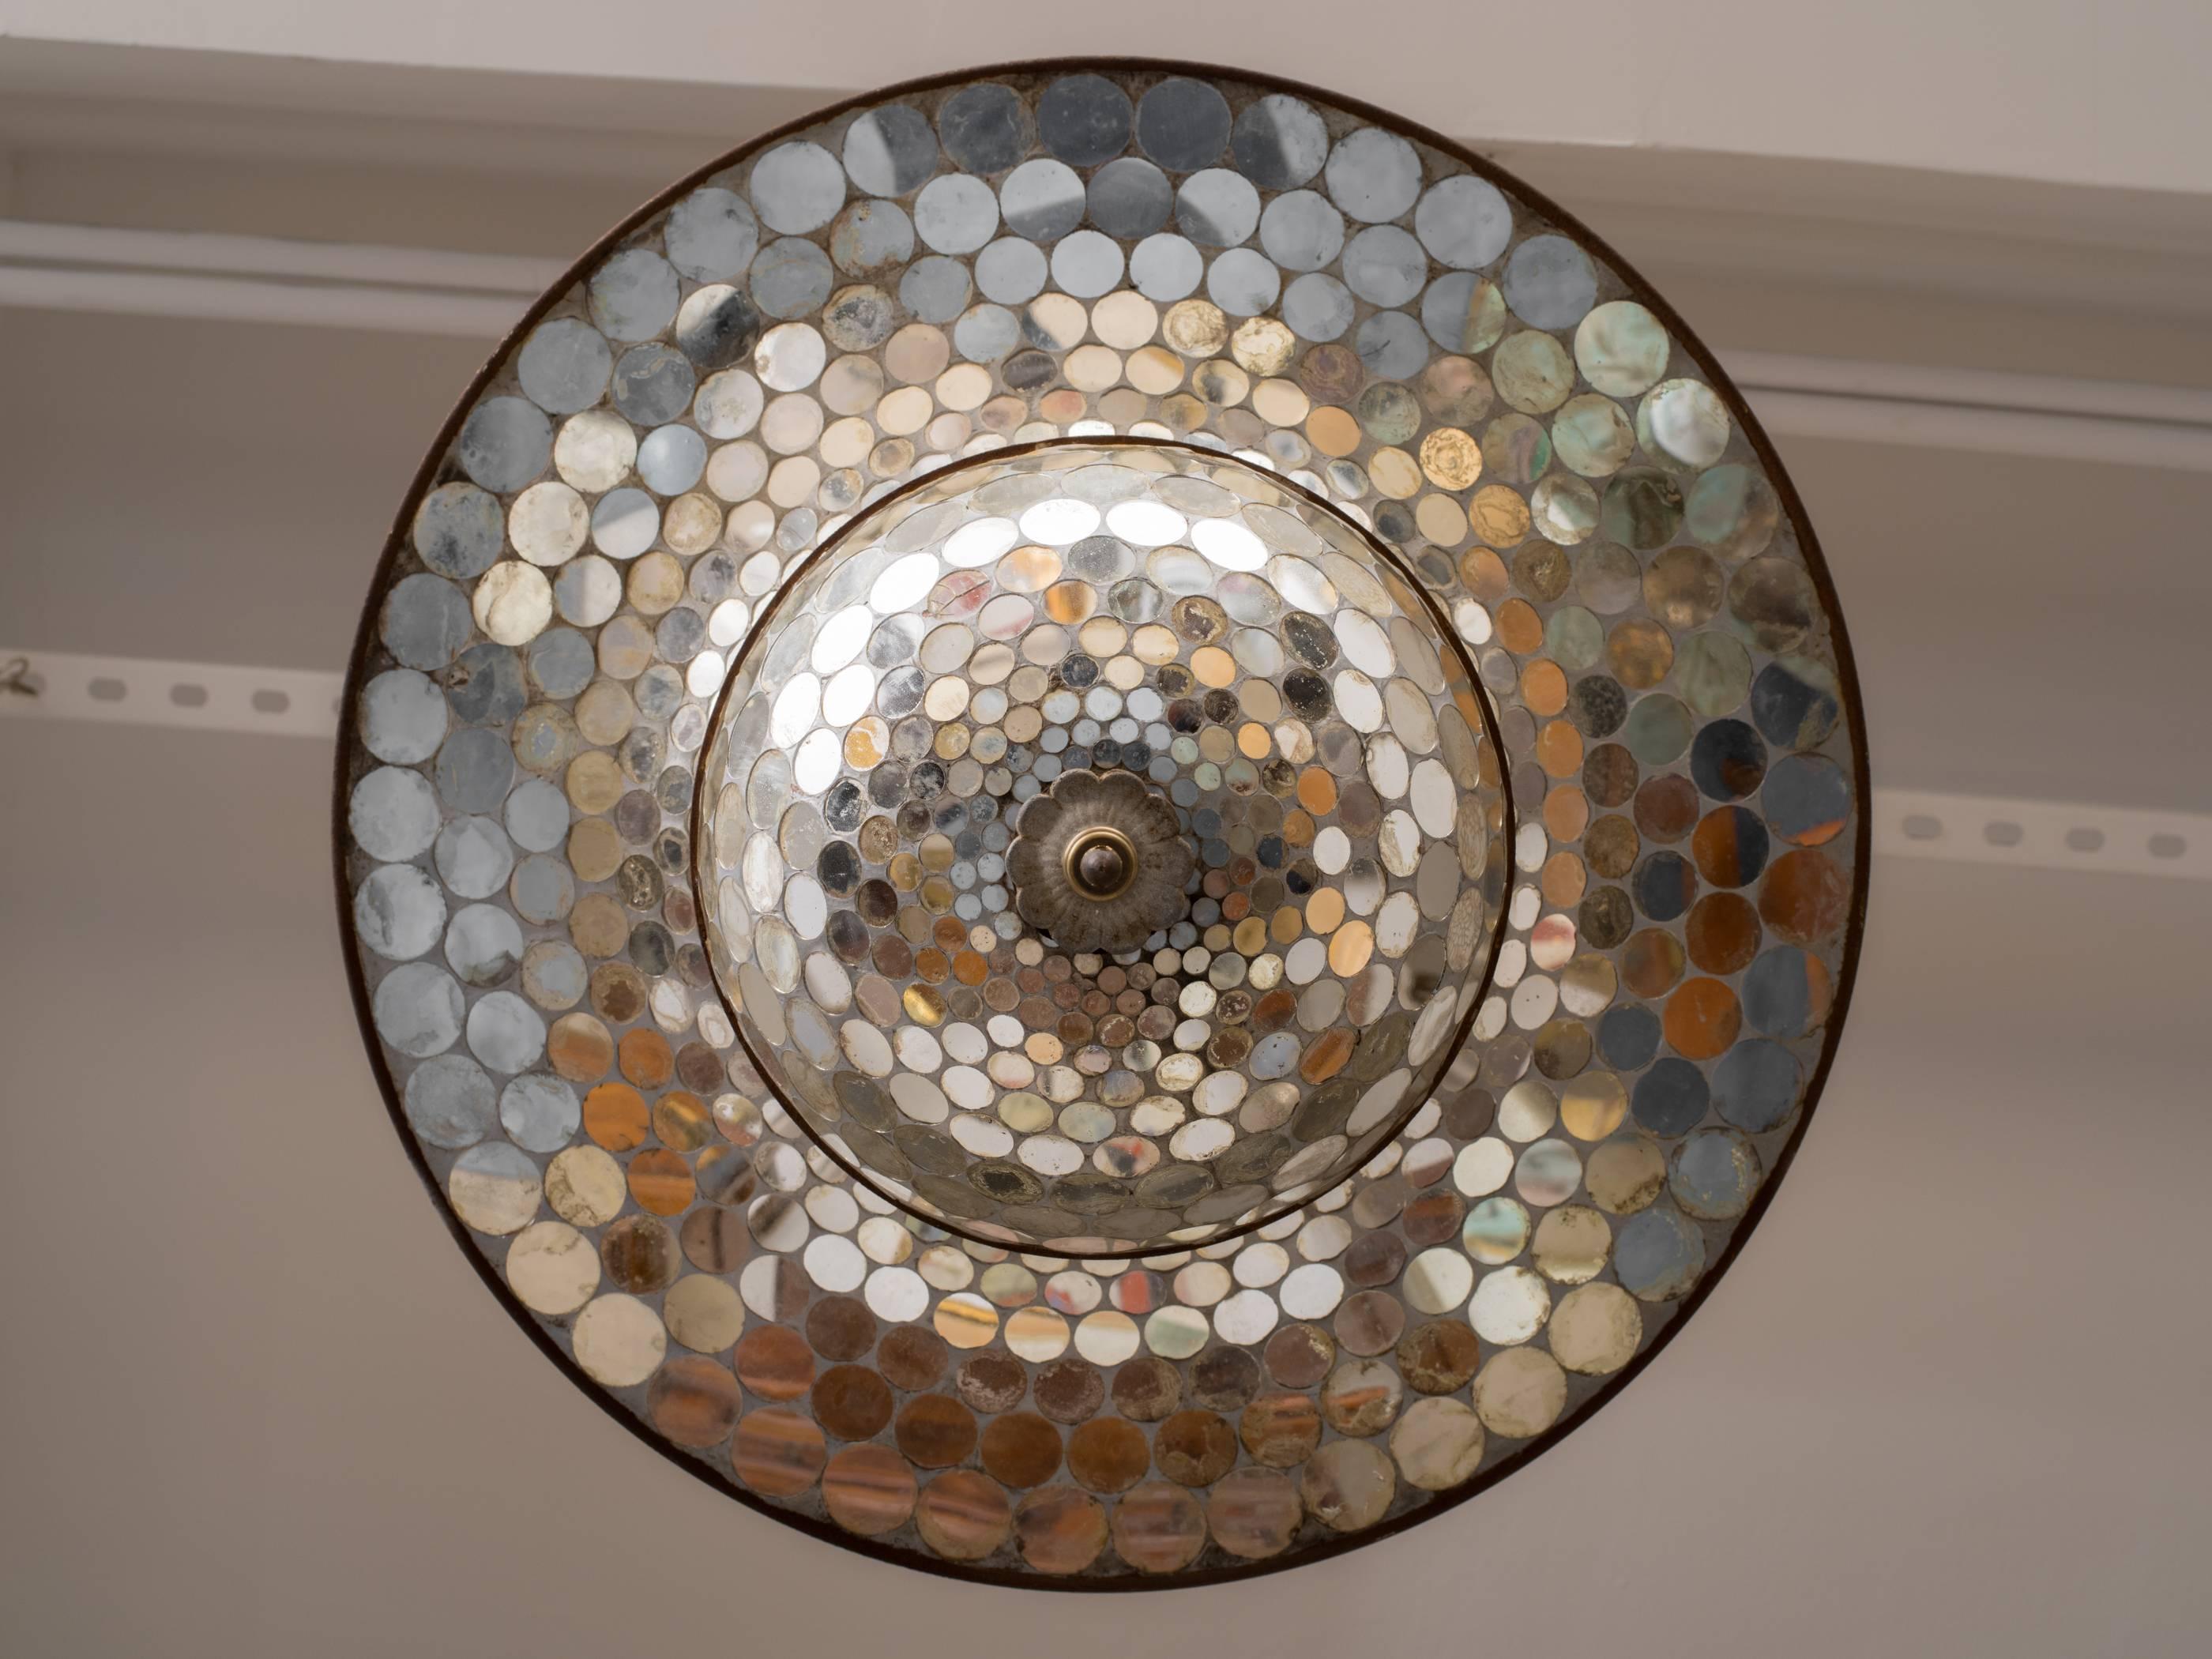 American Whimsical Mirrored Mosaic Suspension or Disco Ball